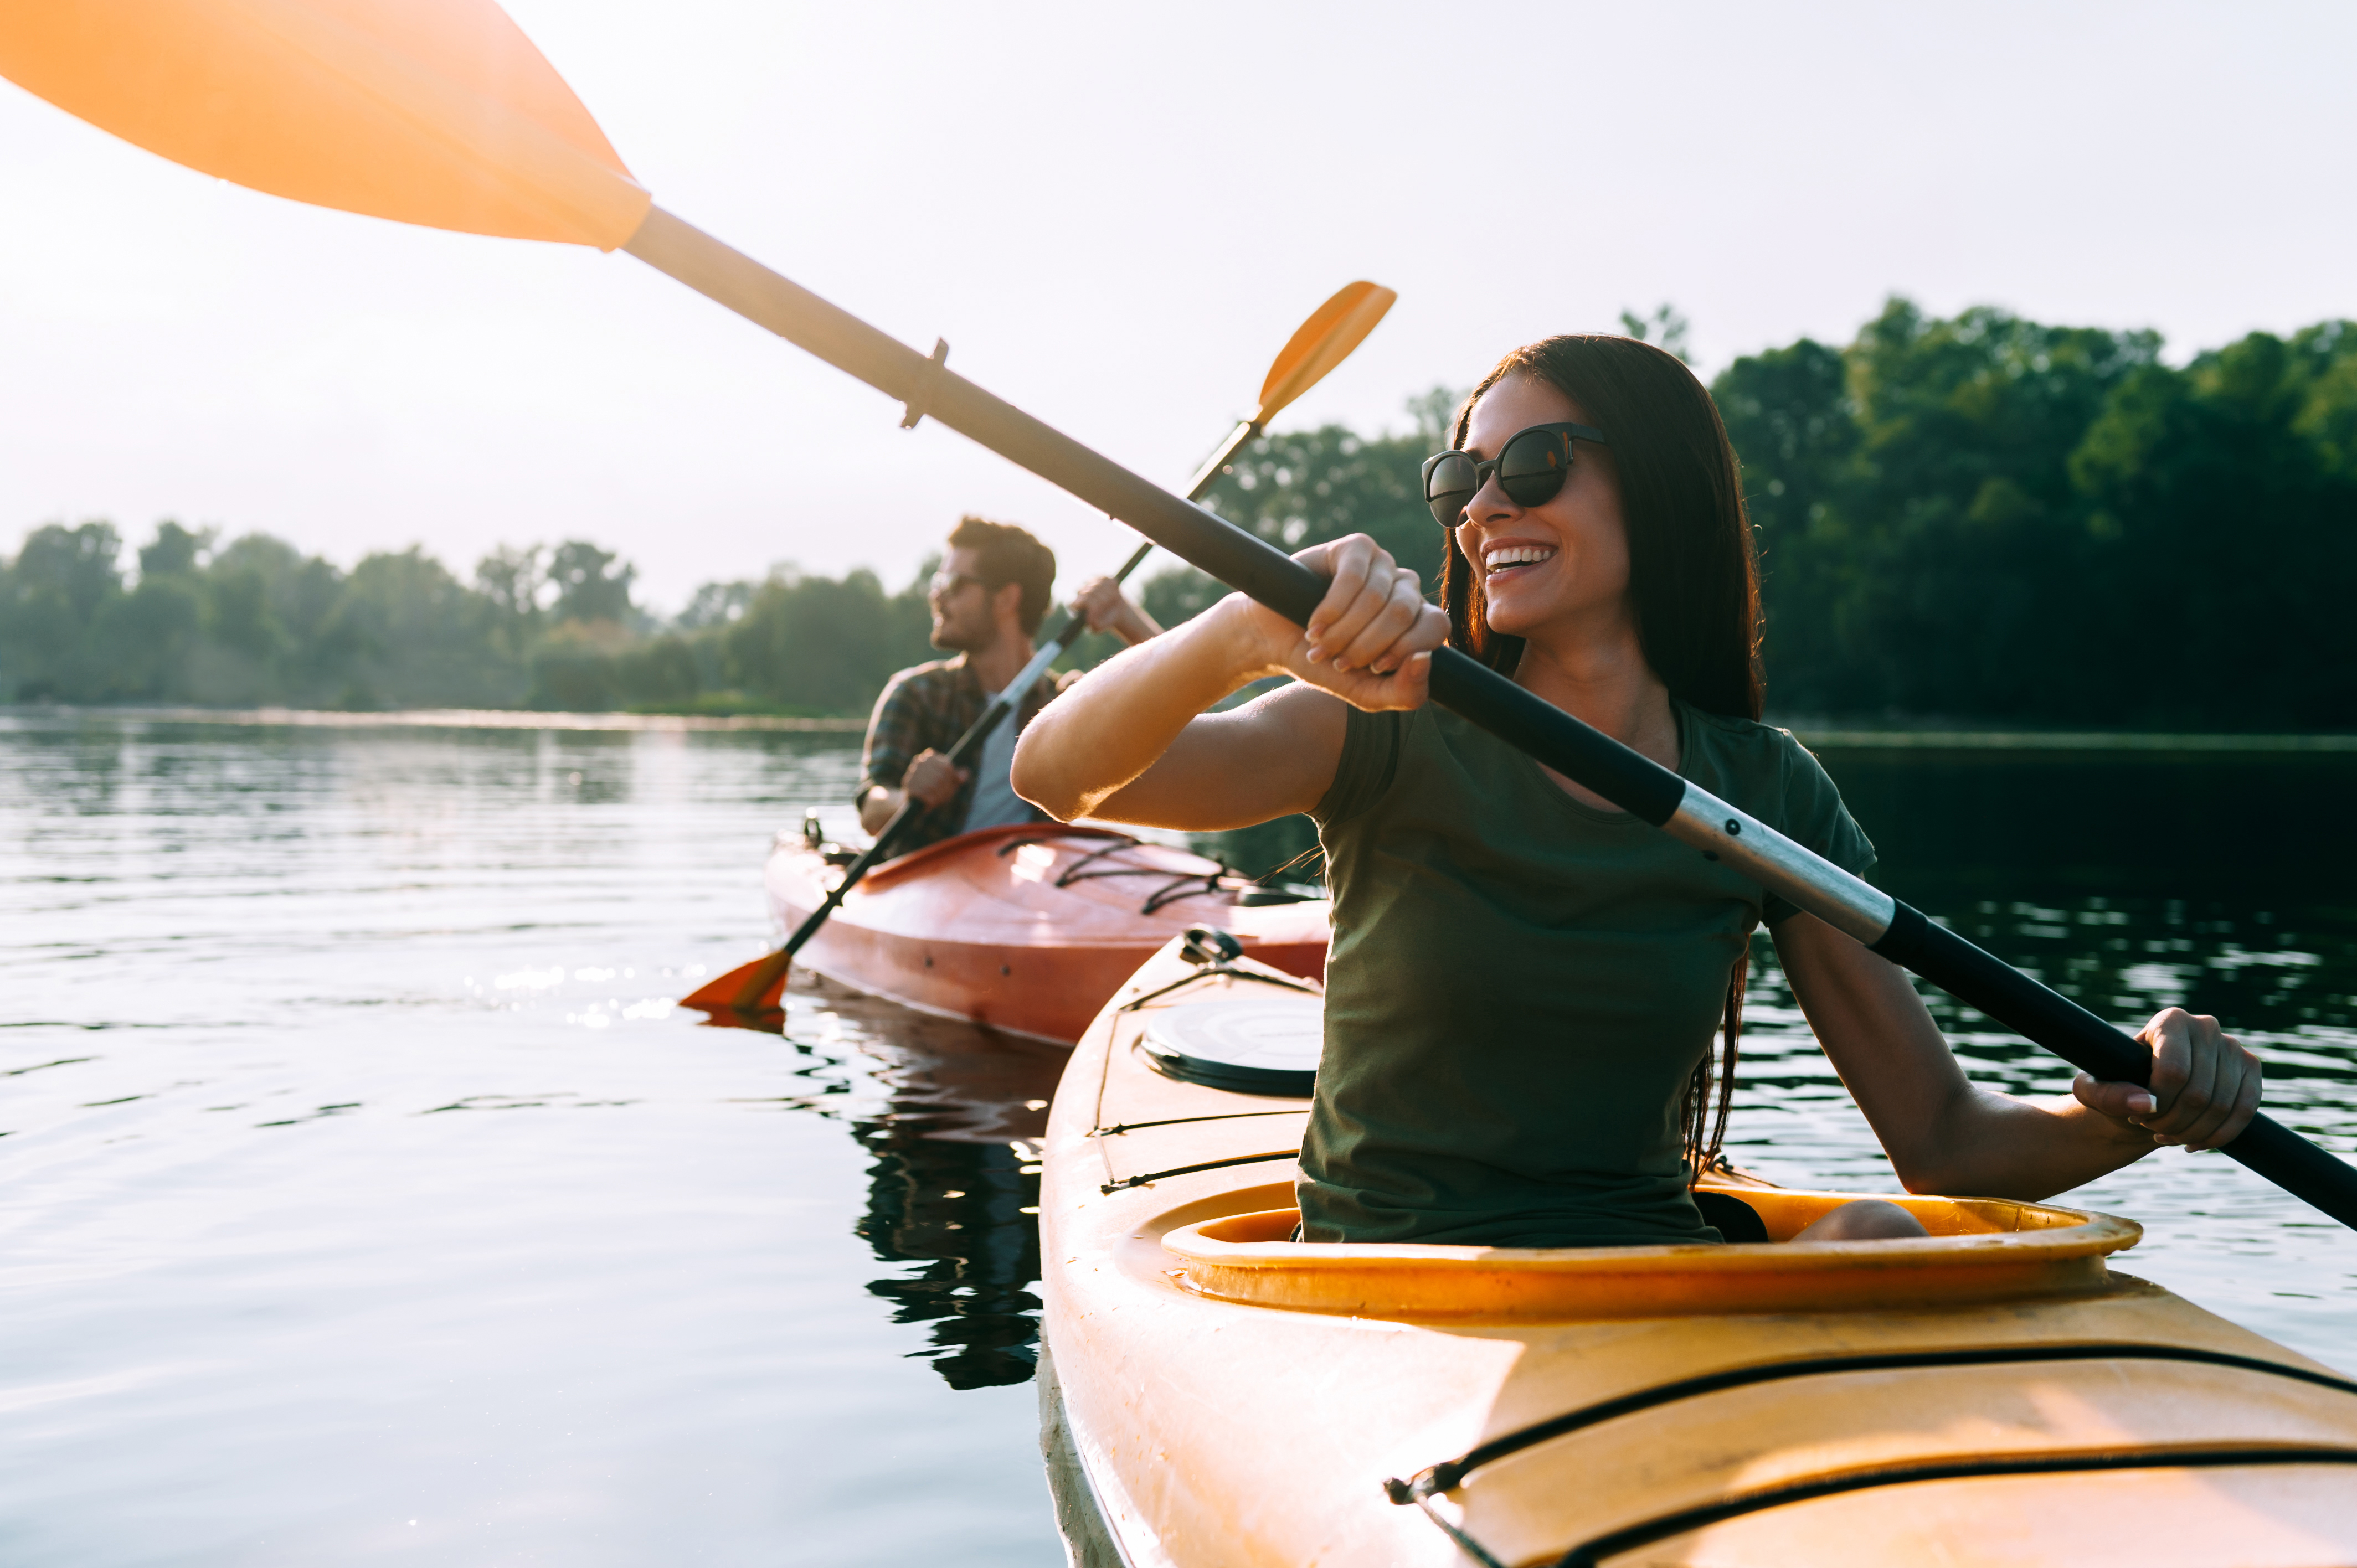 A young couple kayaking on the lake together and smiling | Source: Shutterstock